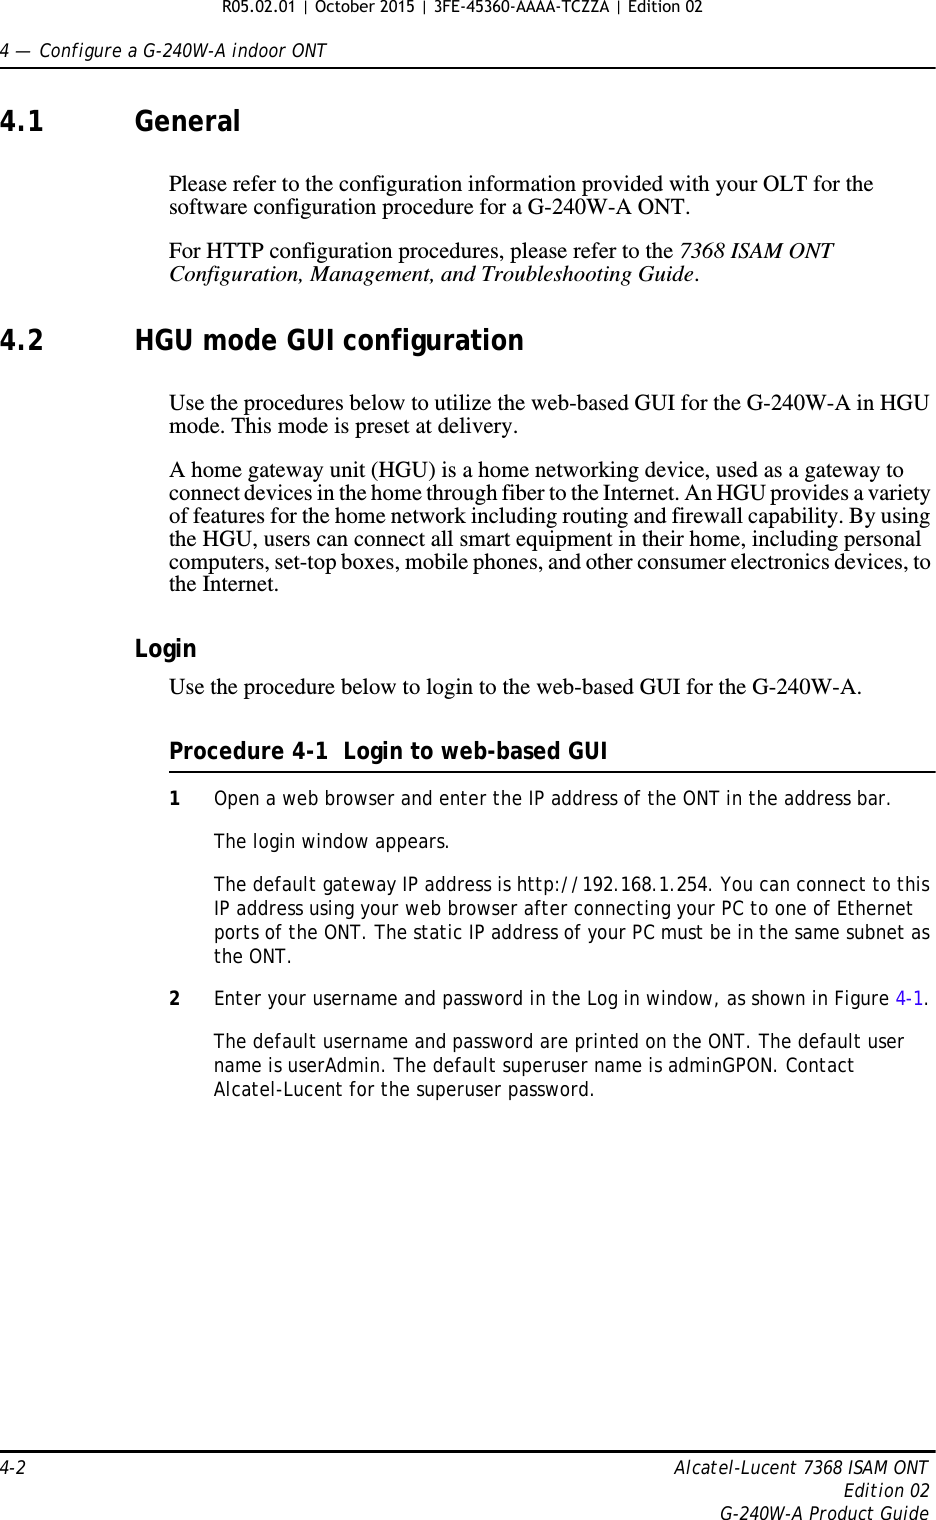 4 —  Configure a G-240W-A indoor ONT4-2 Alcatel-Lucent 7368 ISAM ONTEdition 02G-240W-A Product Guide4.1 GeneralPlease refer to the configuration information provided with your OLT for the software configuration procedure for a G-240W-A ONT.For HTTP configuration procedures, please refer to the 7368 ISAM ONT Configuration, Management, and Troubleshooting Guide.4.2 HGU mode GUI configurationUse the procedures below to utilize the web-based GUI for the G-240W-A in HGU mode. This mode is preset at delivery.A home gateway unit (HGU) is a home networking device, used as a gateway to connect devices in the home through fiber to the Internet. An HGU provides a variety of features for the home network including routing and firewall capability. By using the HGU, users can connect all smart equipment in their home, including personal computers, set-top boxes, mobile phones, and other consumer electronics devices, to the Internet.LoginUse the procedure below to login to the web-based GUI for the G-240W-A.Procedure 4-1  Login to web-based GUI1Open a web browser and enter the IP address of the ONT in the address bar.The login window appears. The default gateway IP address is http://192.168.1.254. You can connect to this IP address using your web browser after connecting your PC to one of Ethernet ports of the ONT. The static IP address of your PC must be in the same subnet as the ONT.2Enter your username and password in the Log in window, as shown in Figure 4-1.The default username and password are printed on the ONT. The default user name is userAdmin. The default superuser name is adminGPON. Contact Alcatel-Lucent for the superuser password. R05.02.01 | October 2015 | 3FE-45360-AAAA-TCZZA | Edition 02 